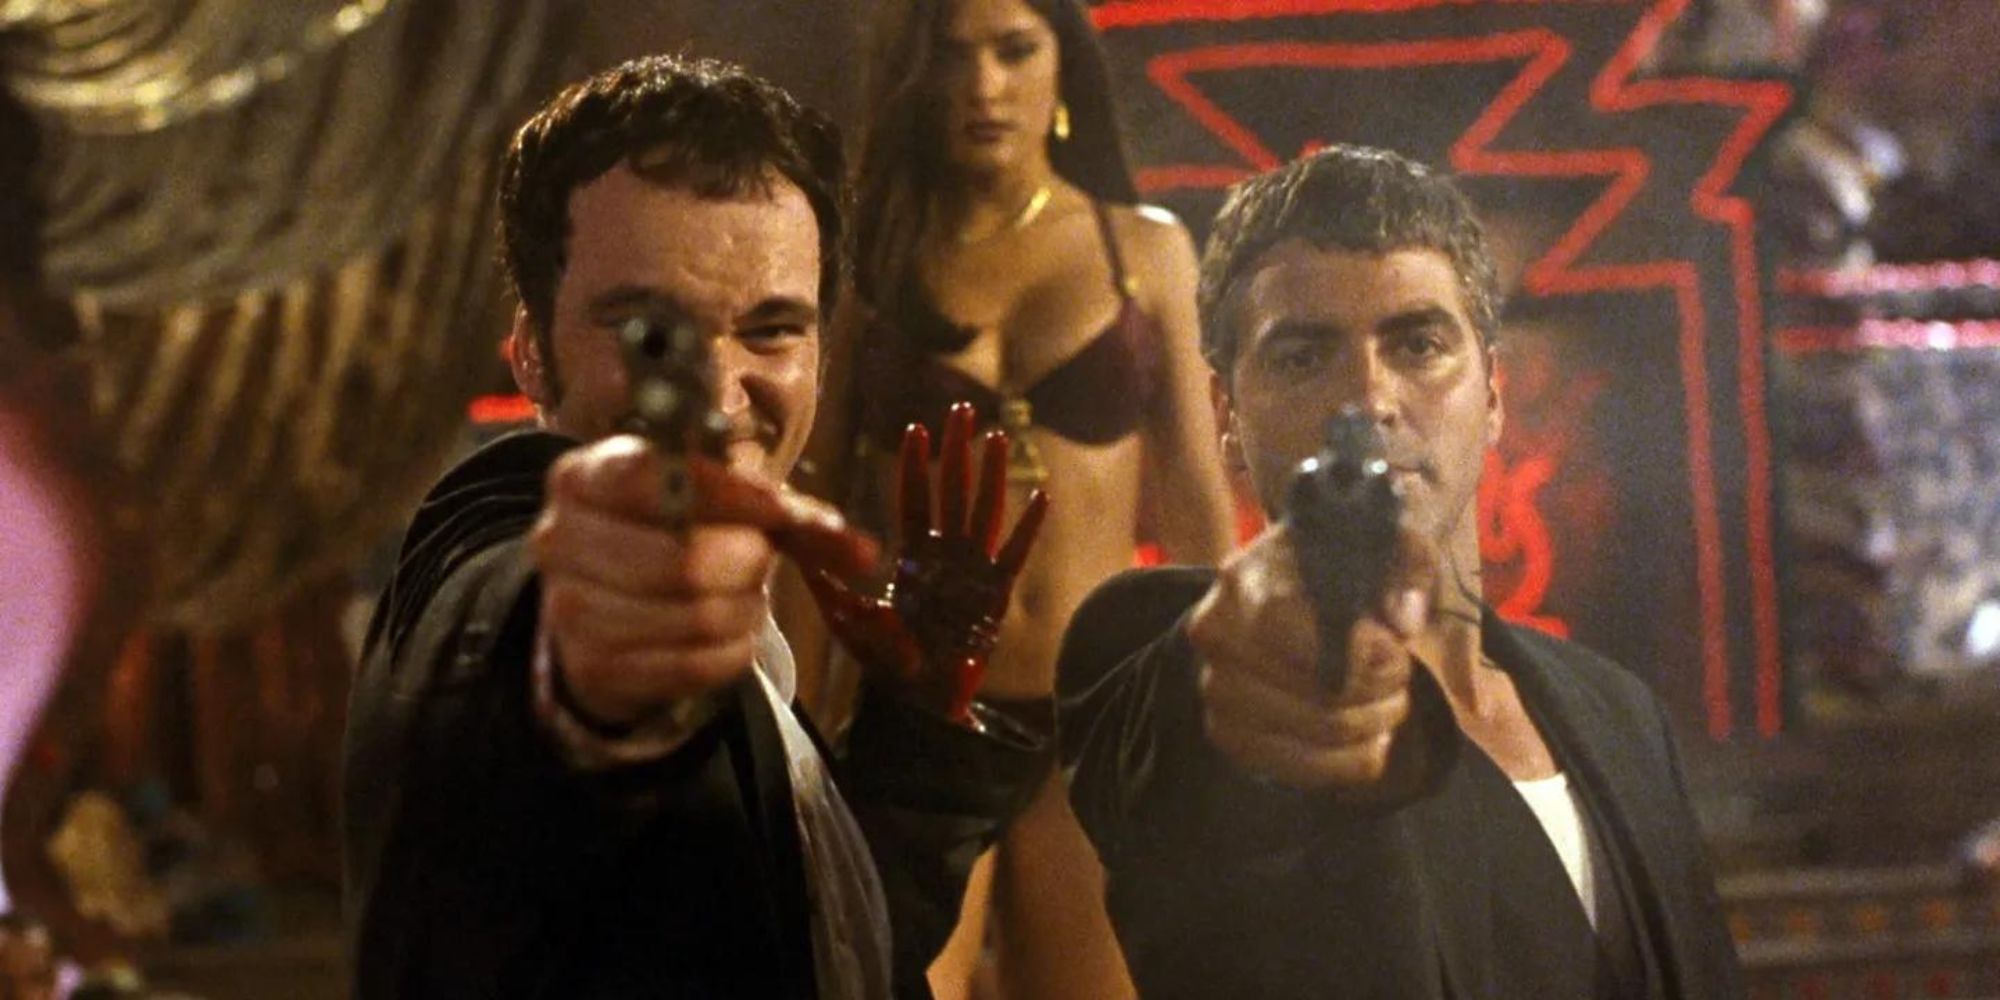 The Gecko Brothers with guns in From Dusk Till Dawn (1996)